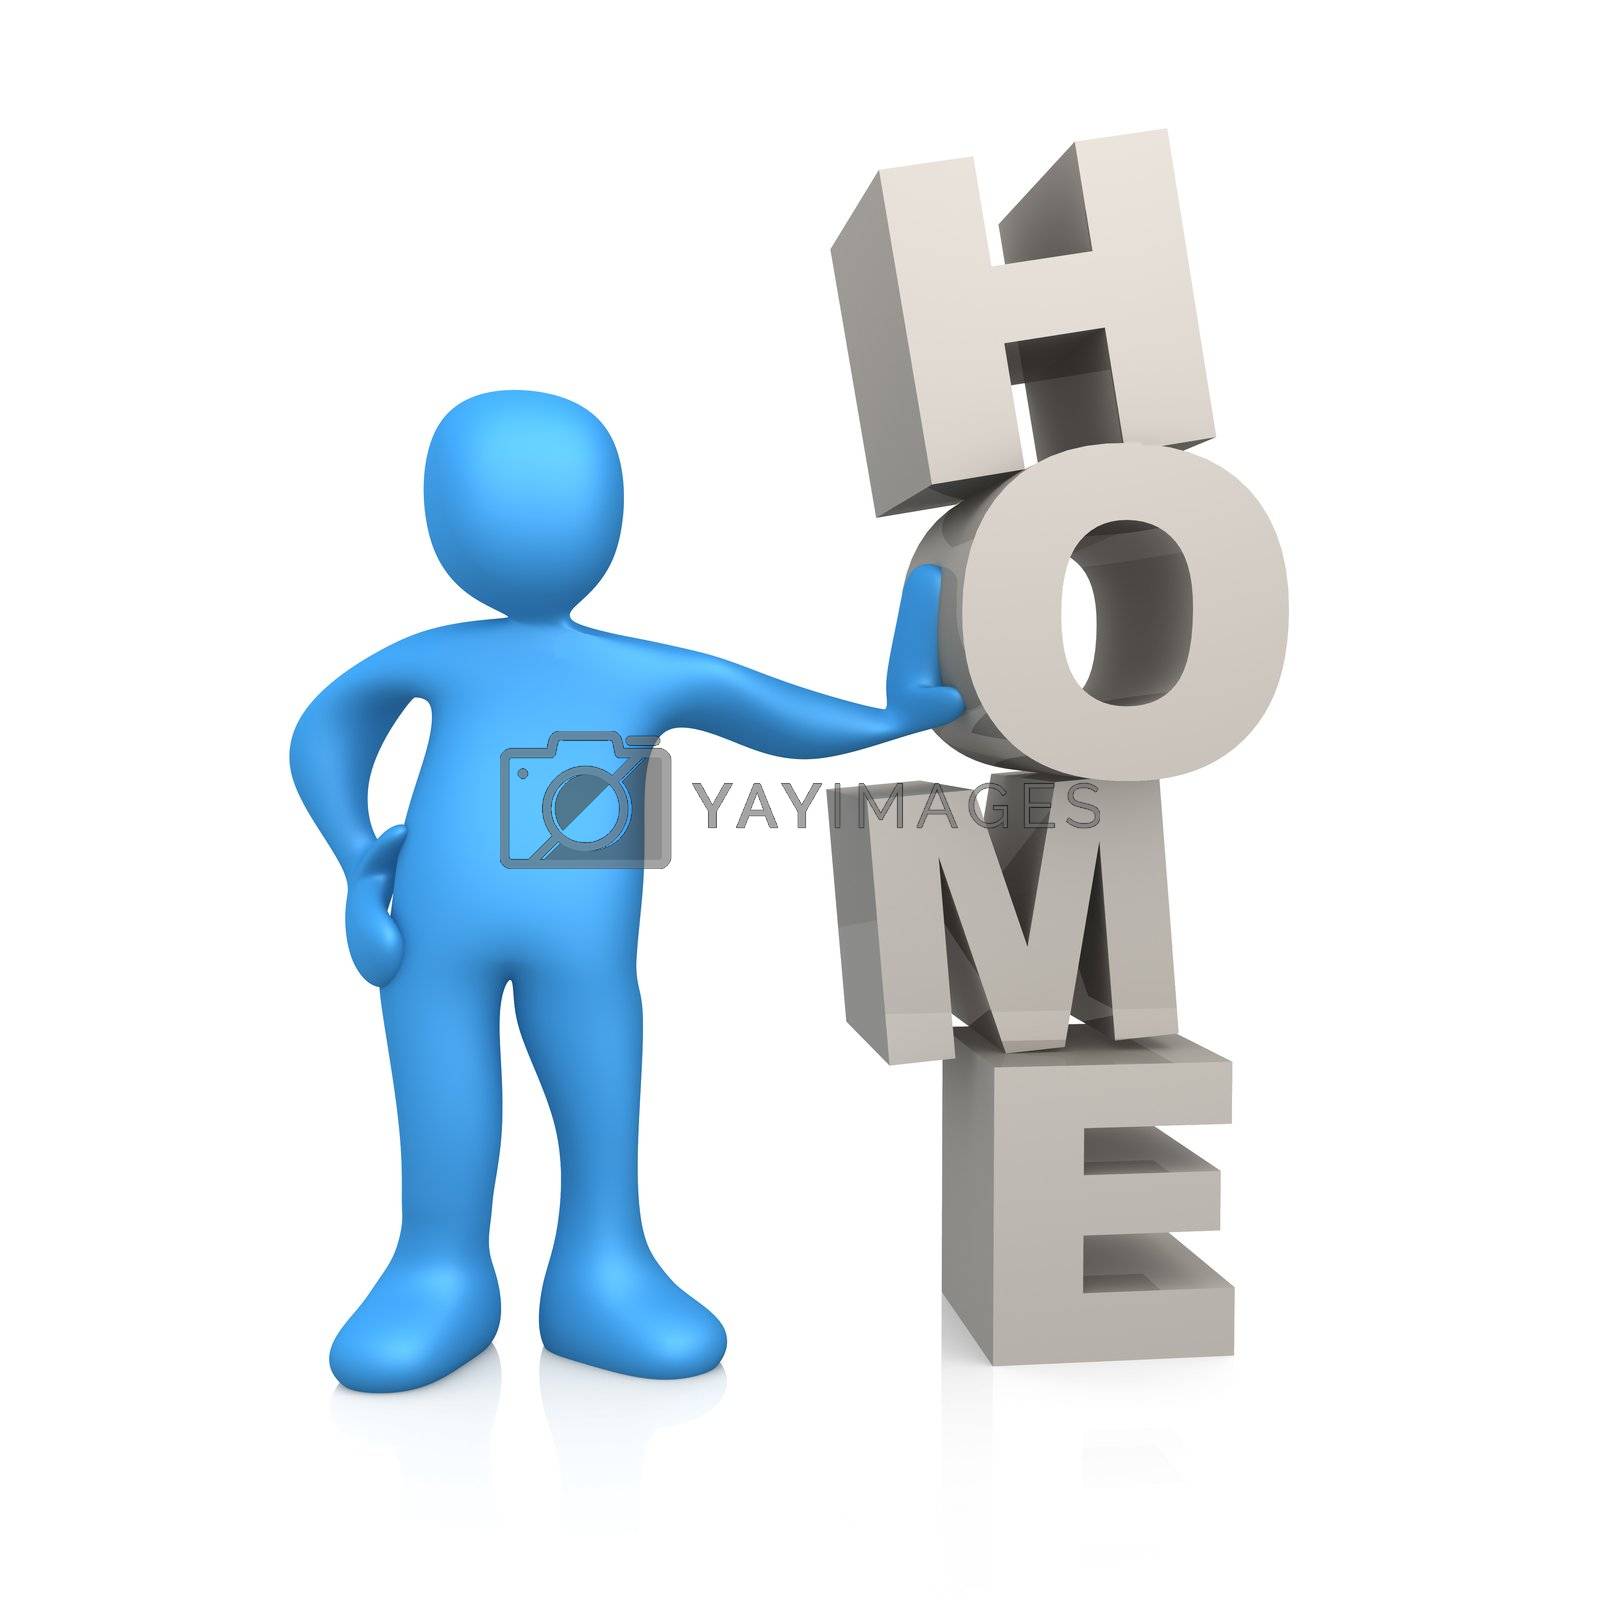 Royalty free image of Home by 3pod